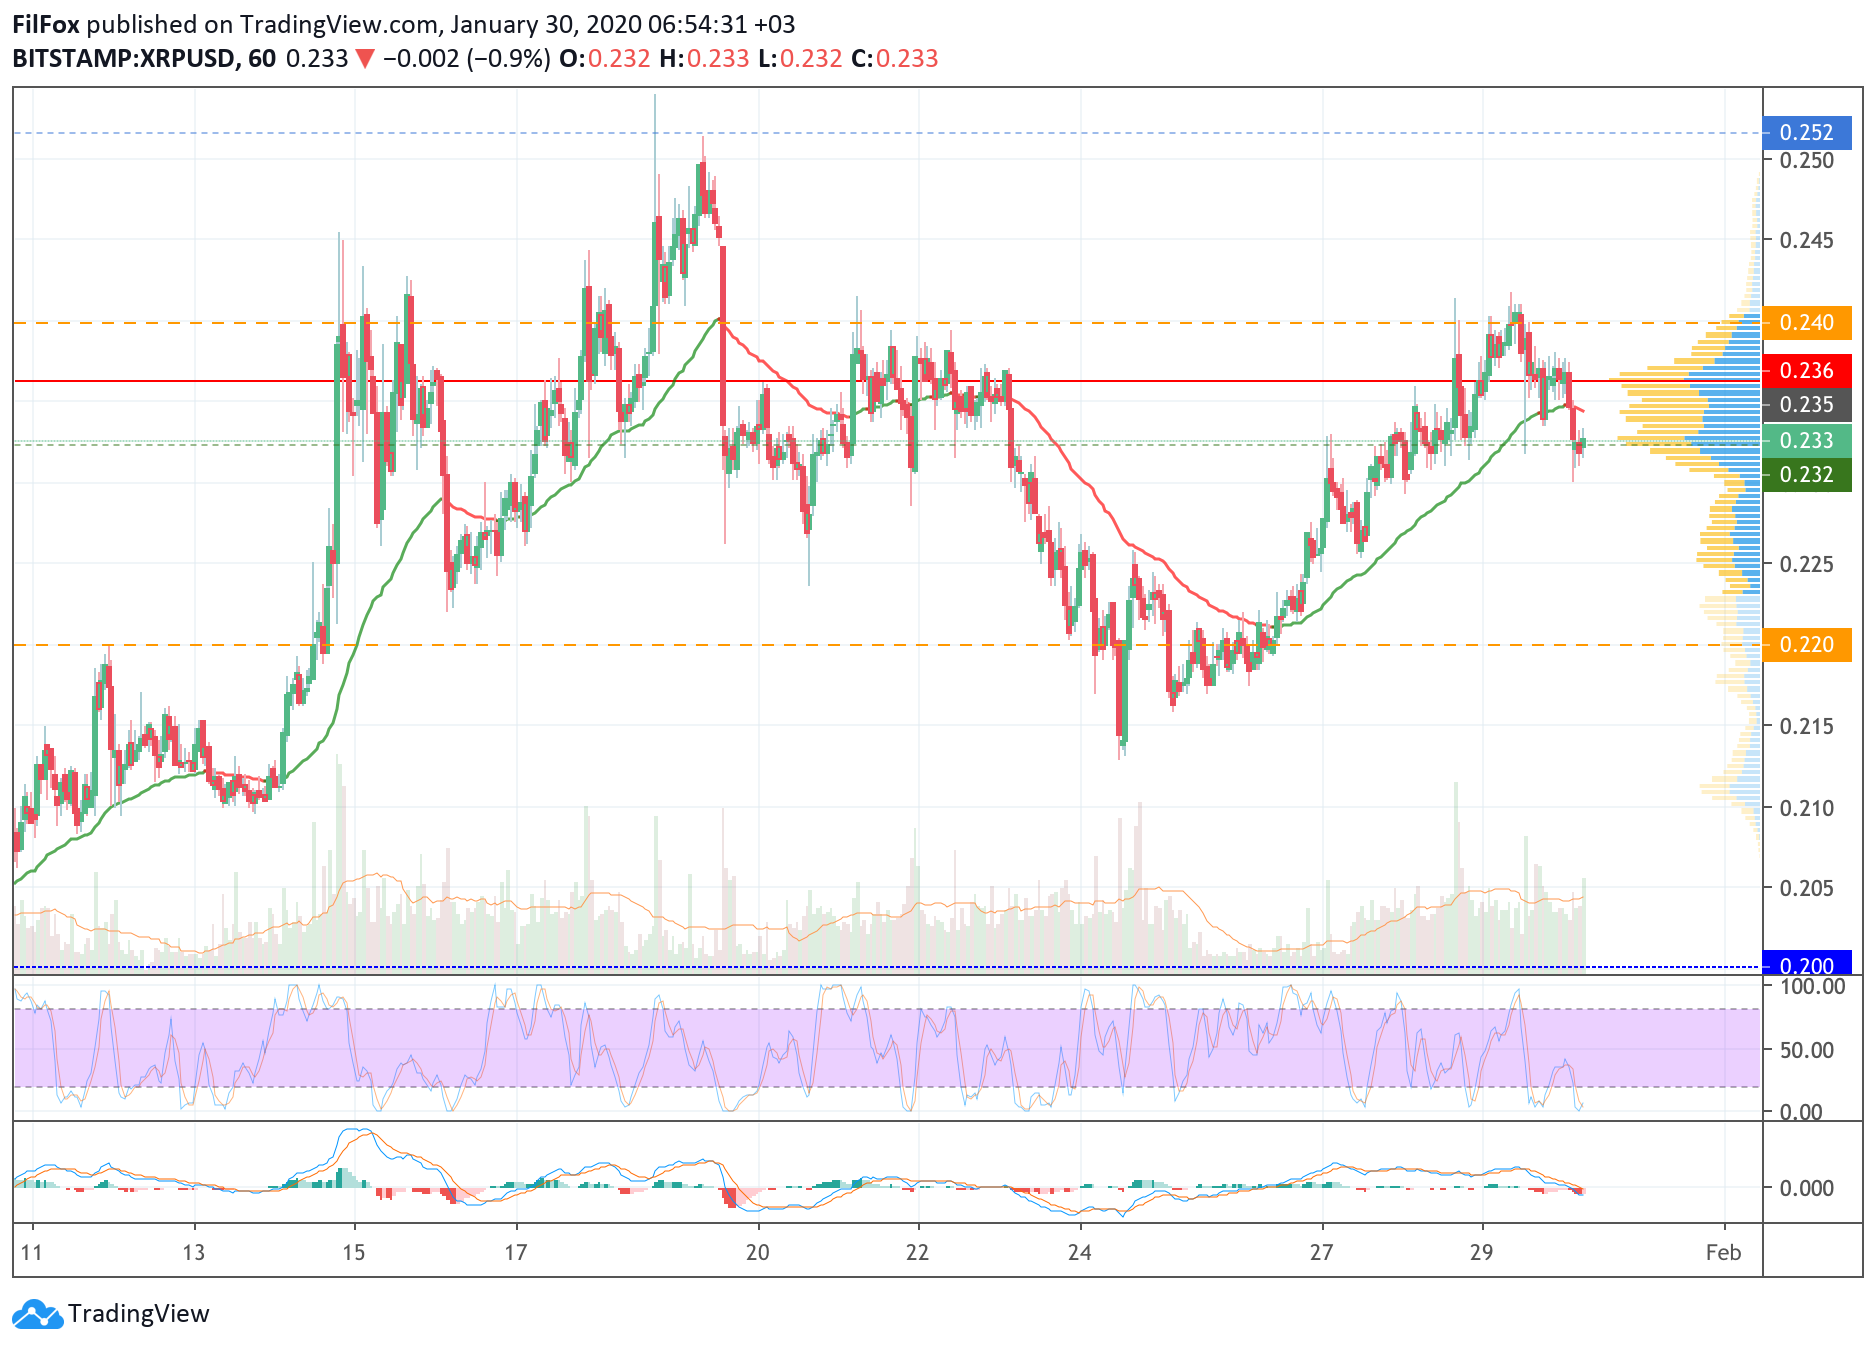 Analysis of cryptocurrency pairs BTC / USD, ETH / USD and XRP / USD on 01/30/2020